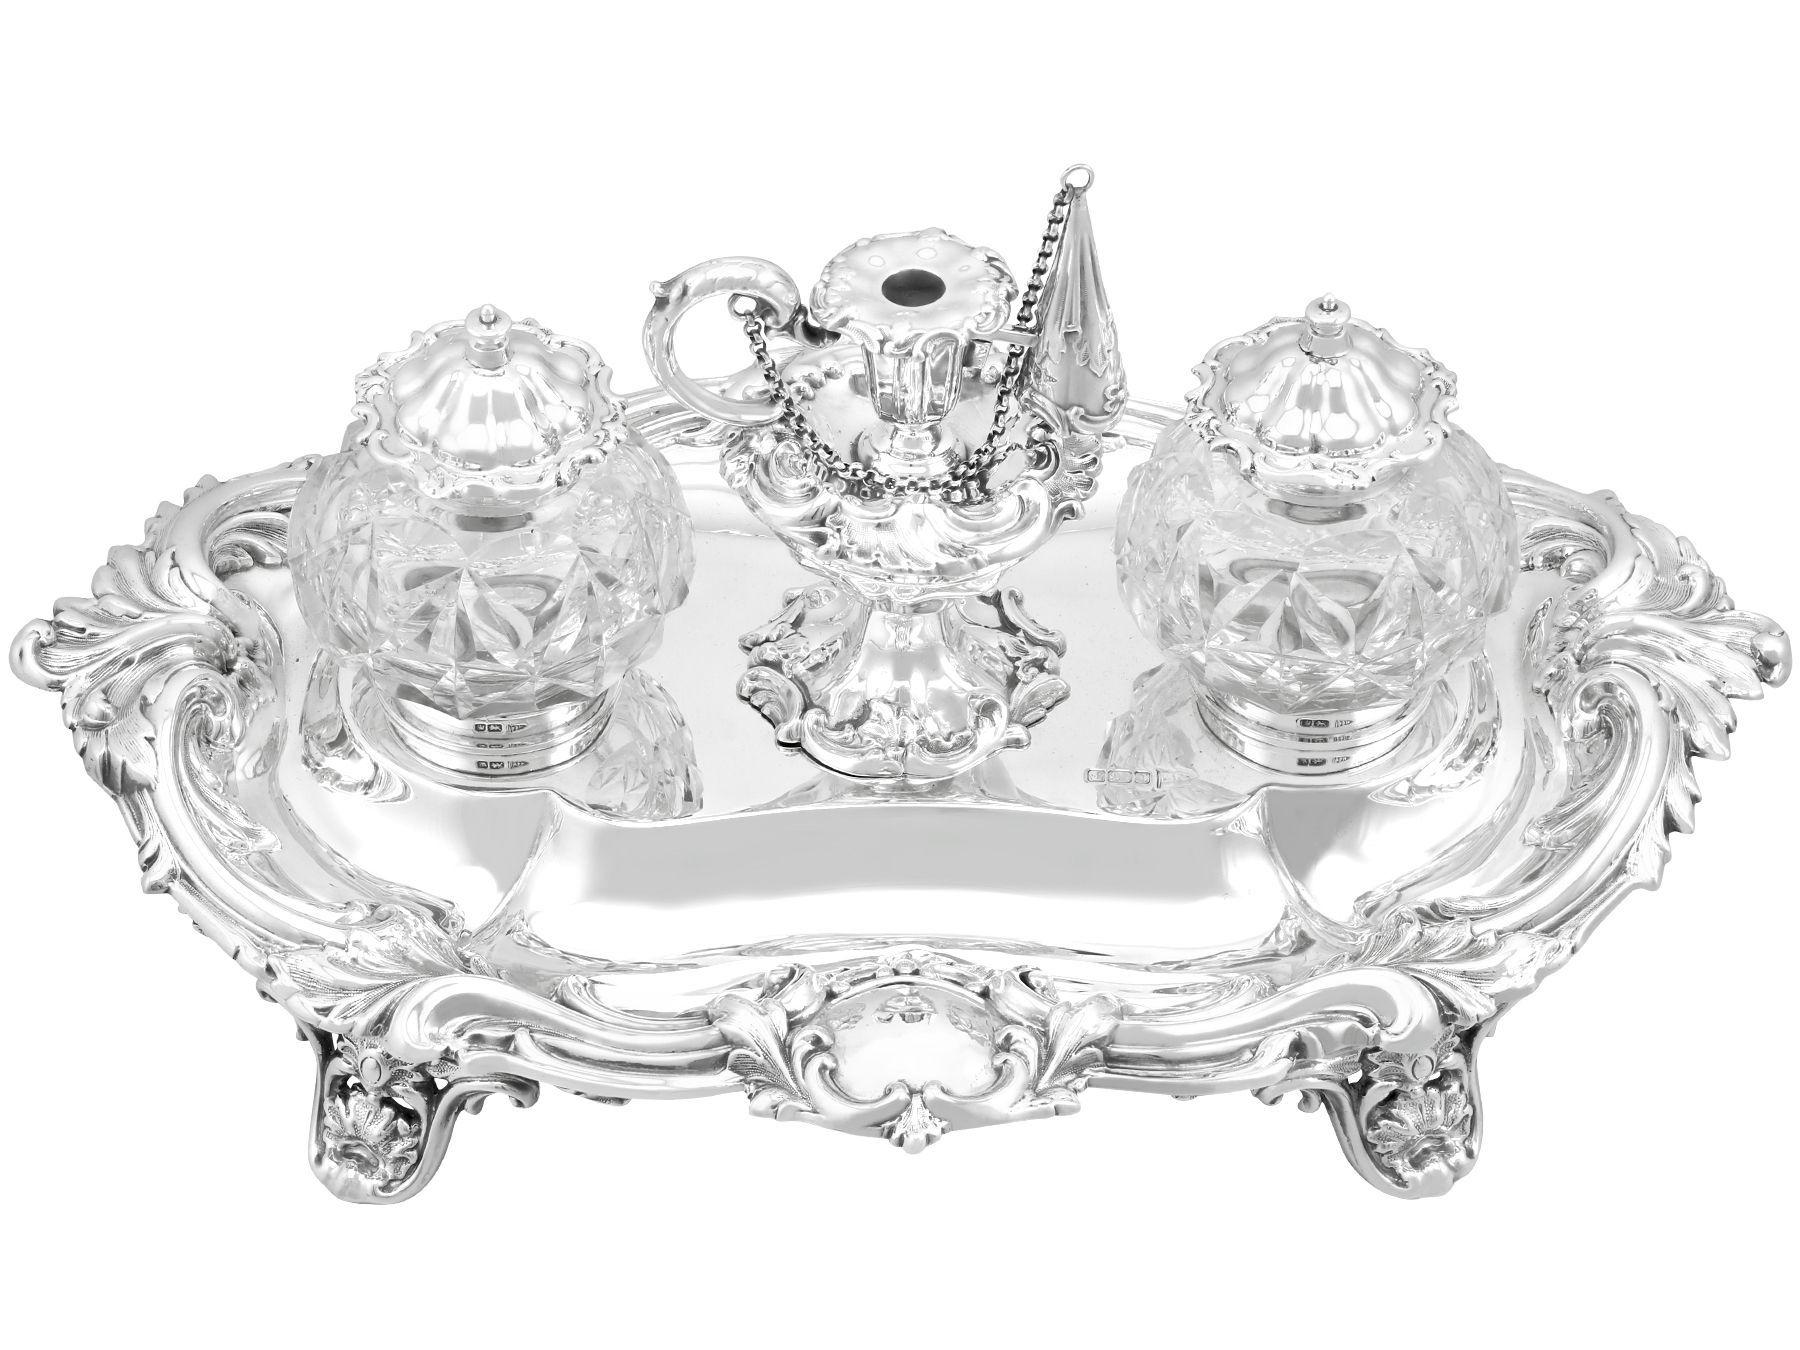 An exceptional, fine and impressive antique Edwardian English sterling silver and glass desk standish; an addition to our ornamental silverware collection

This magnificent antique silver desk standish, in sterling standard, has an oval shaped